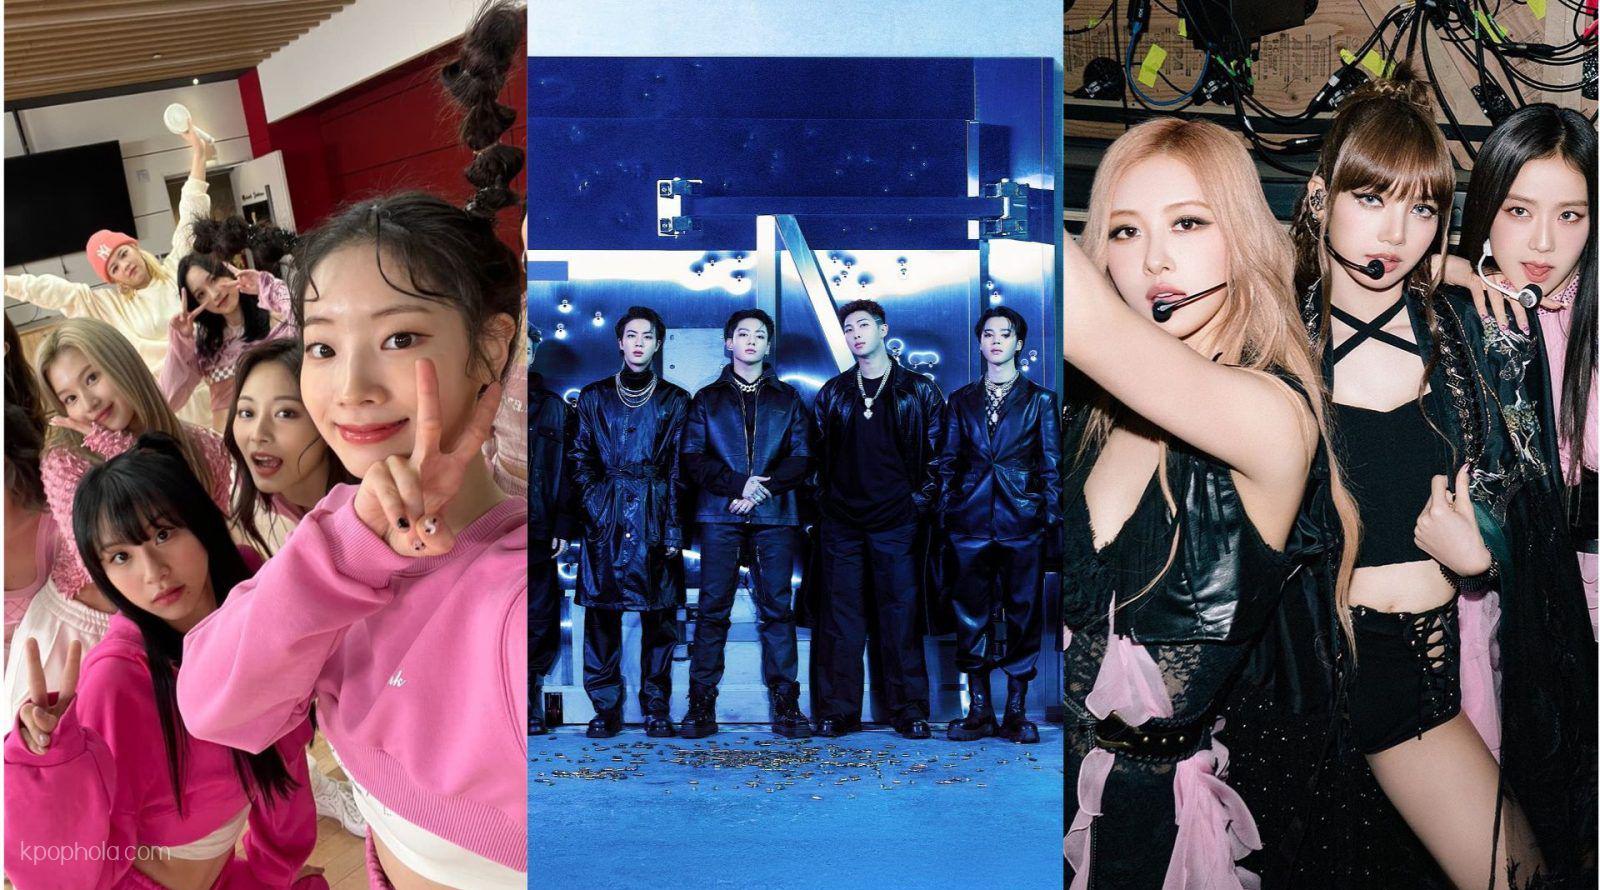 Top 10 K-pop groups with the most followers on Instagram